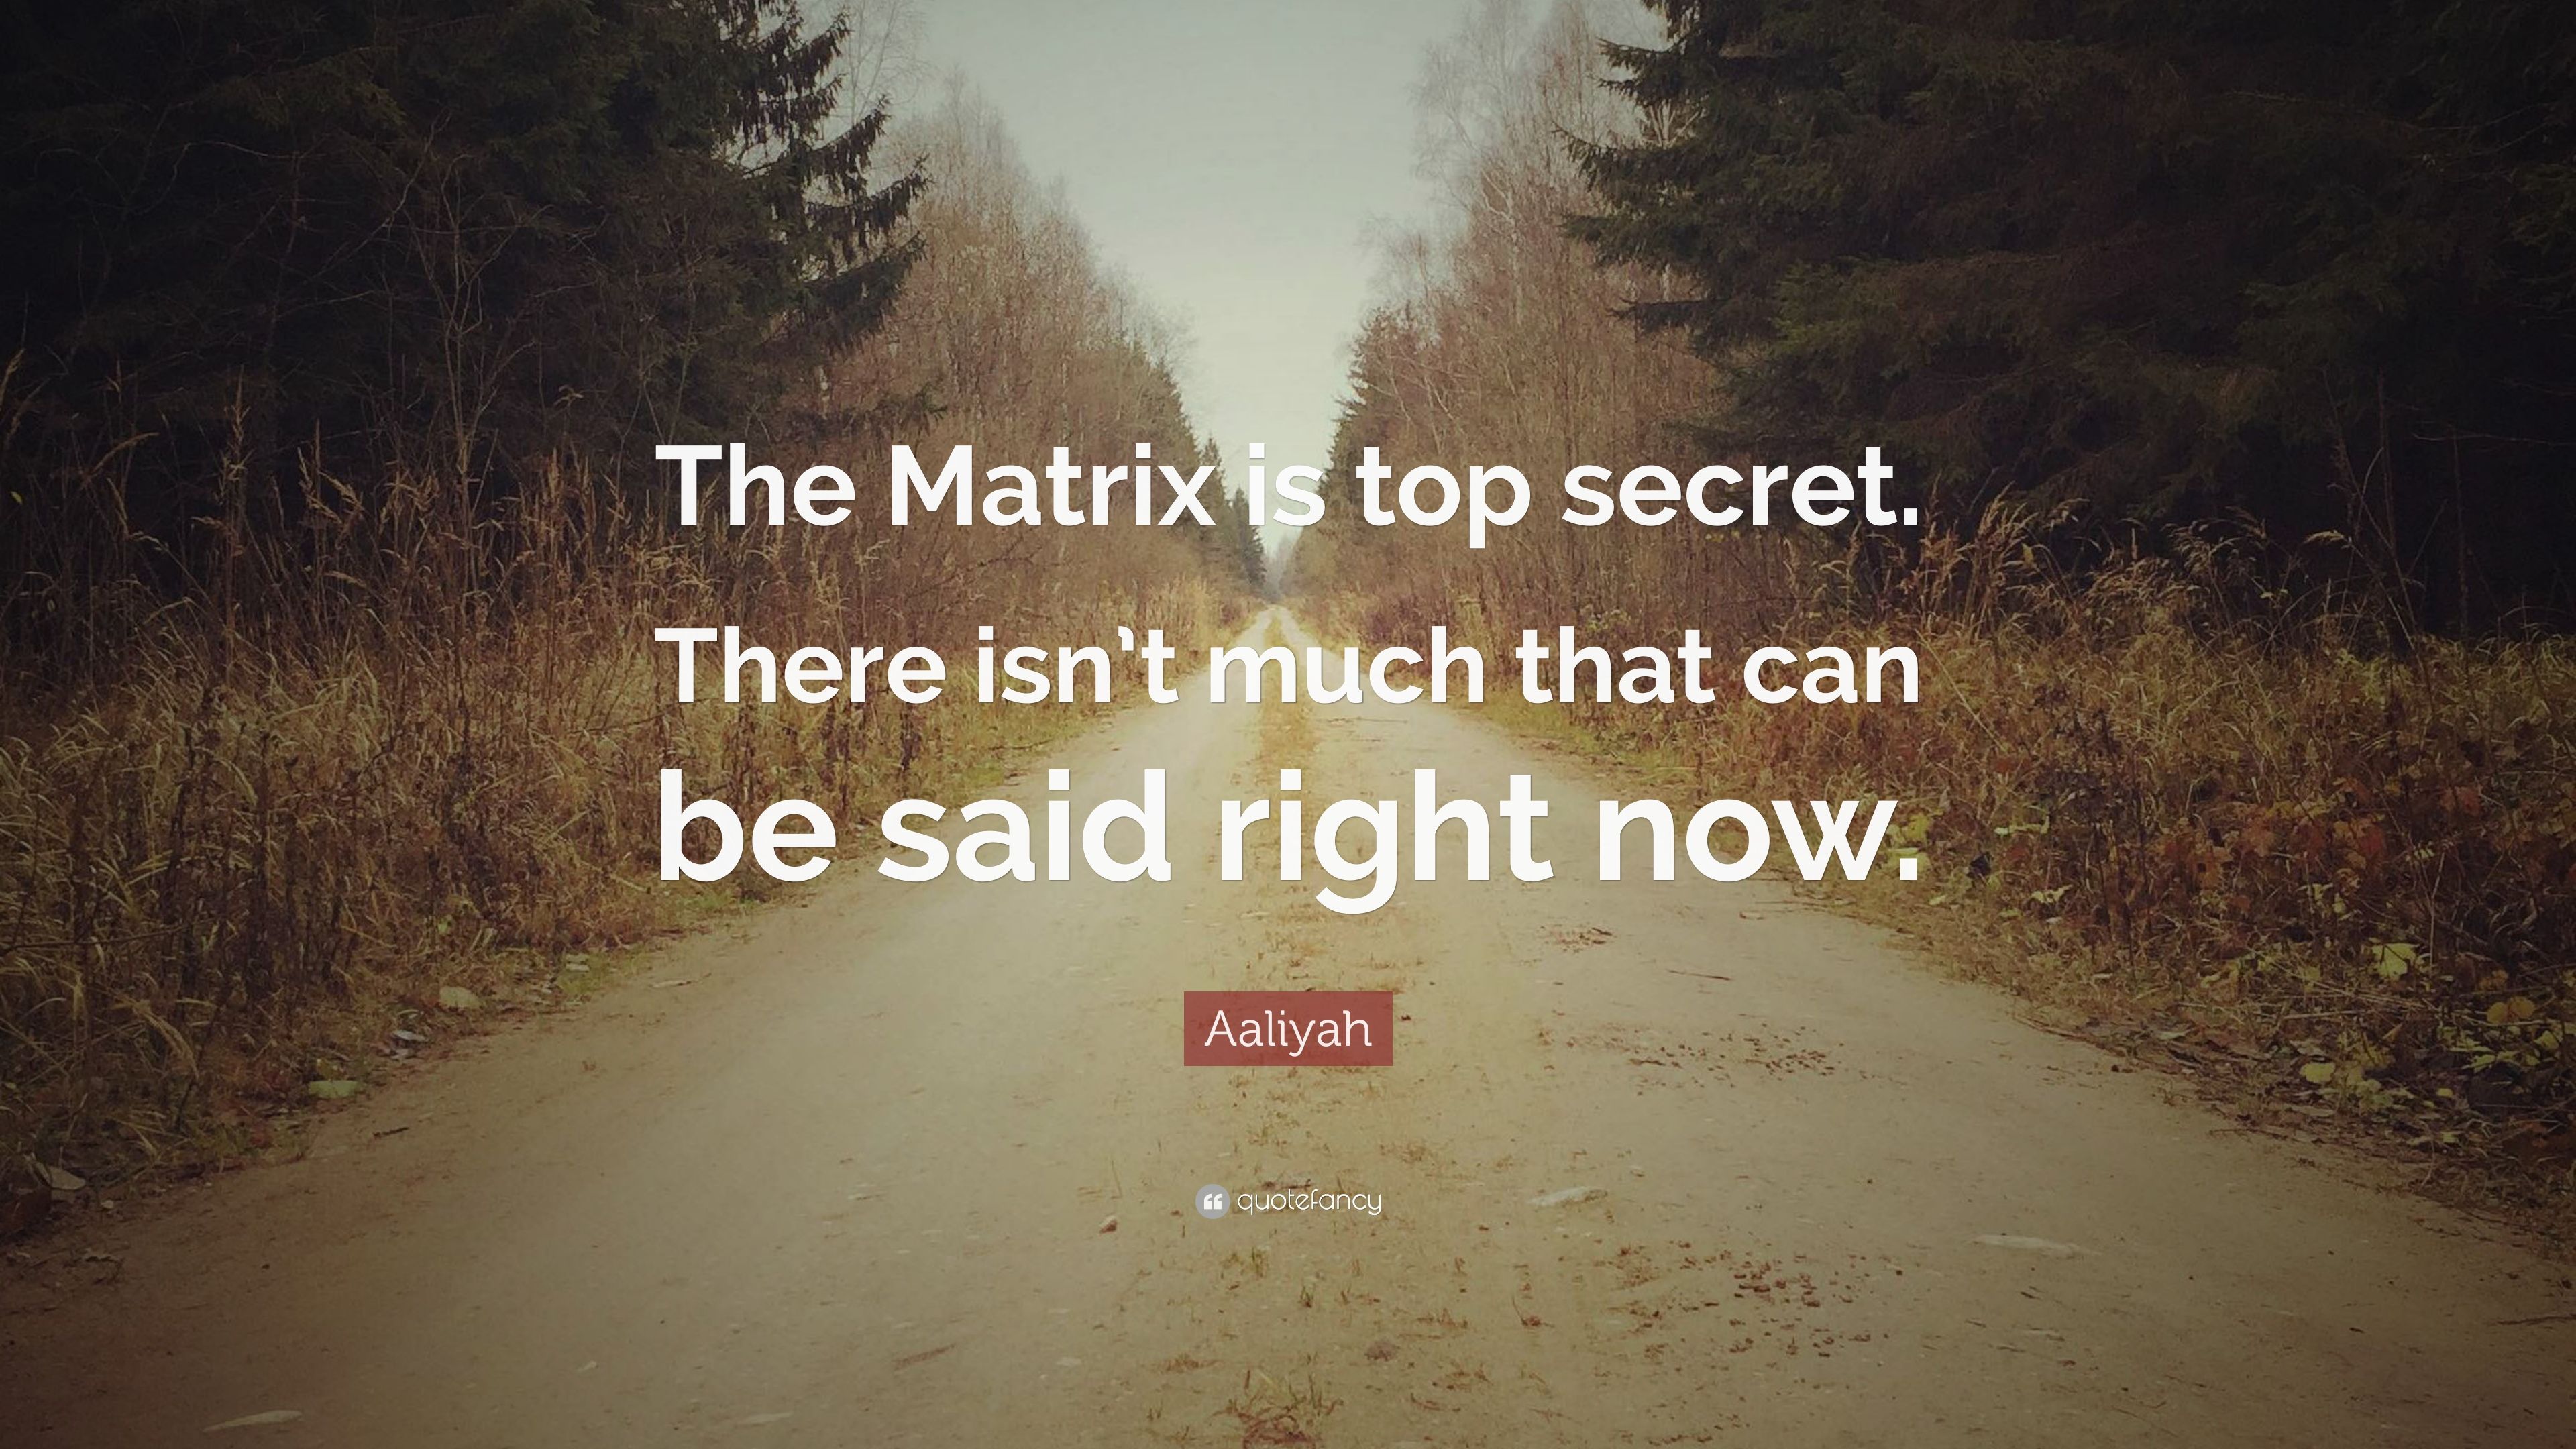 Aaliyah Quote: “The Matrix is top secret. There isn't much that